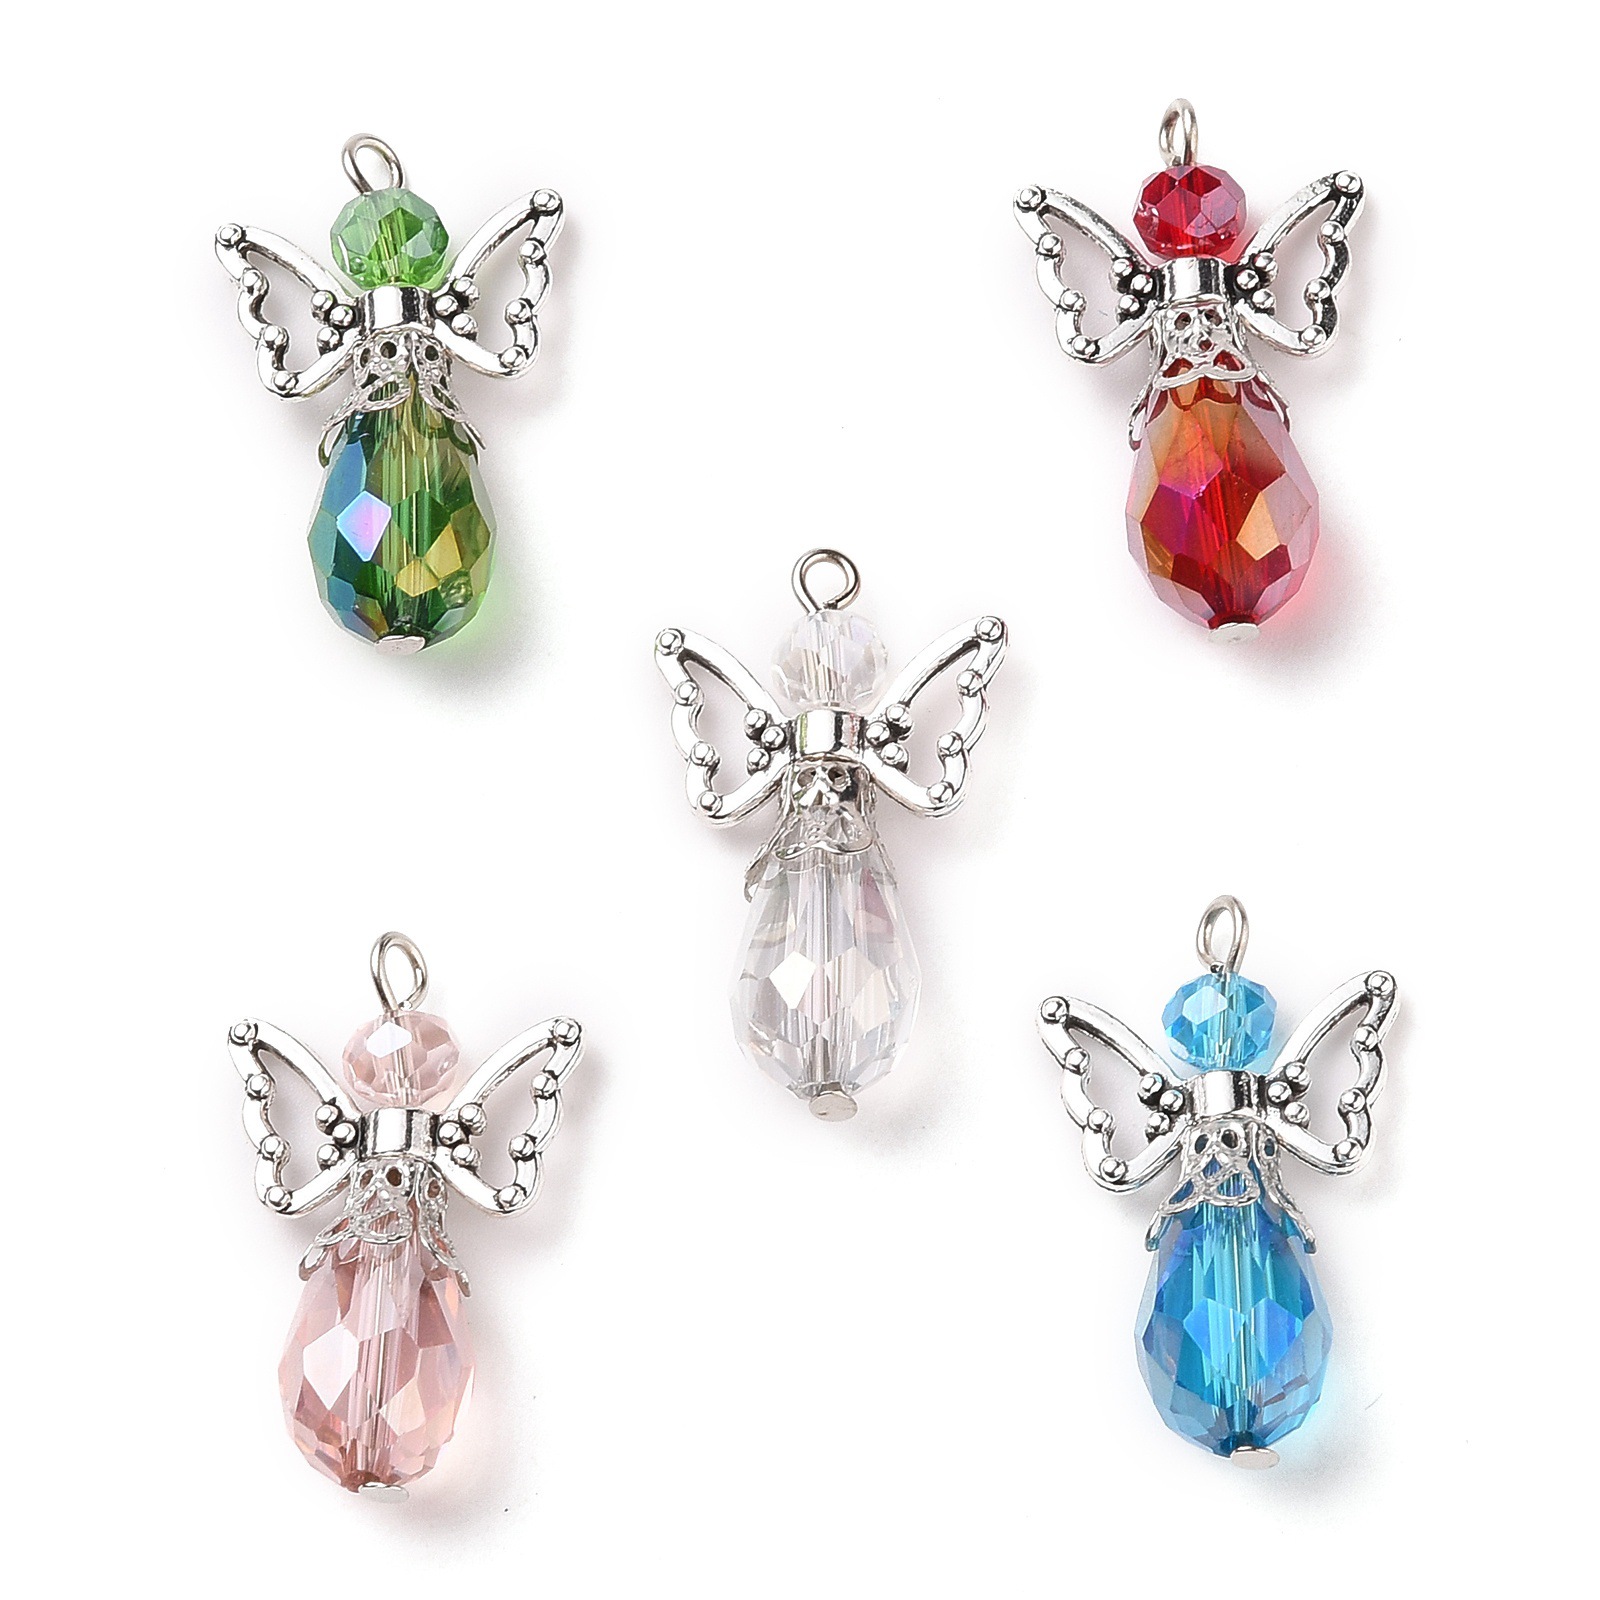 creative guardian angel wings wedding drop alloy pendant party supplies wedding ornaments keychain accessories